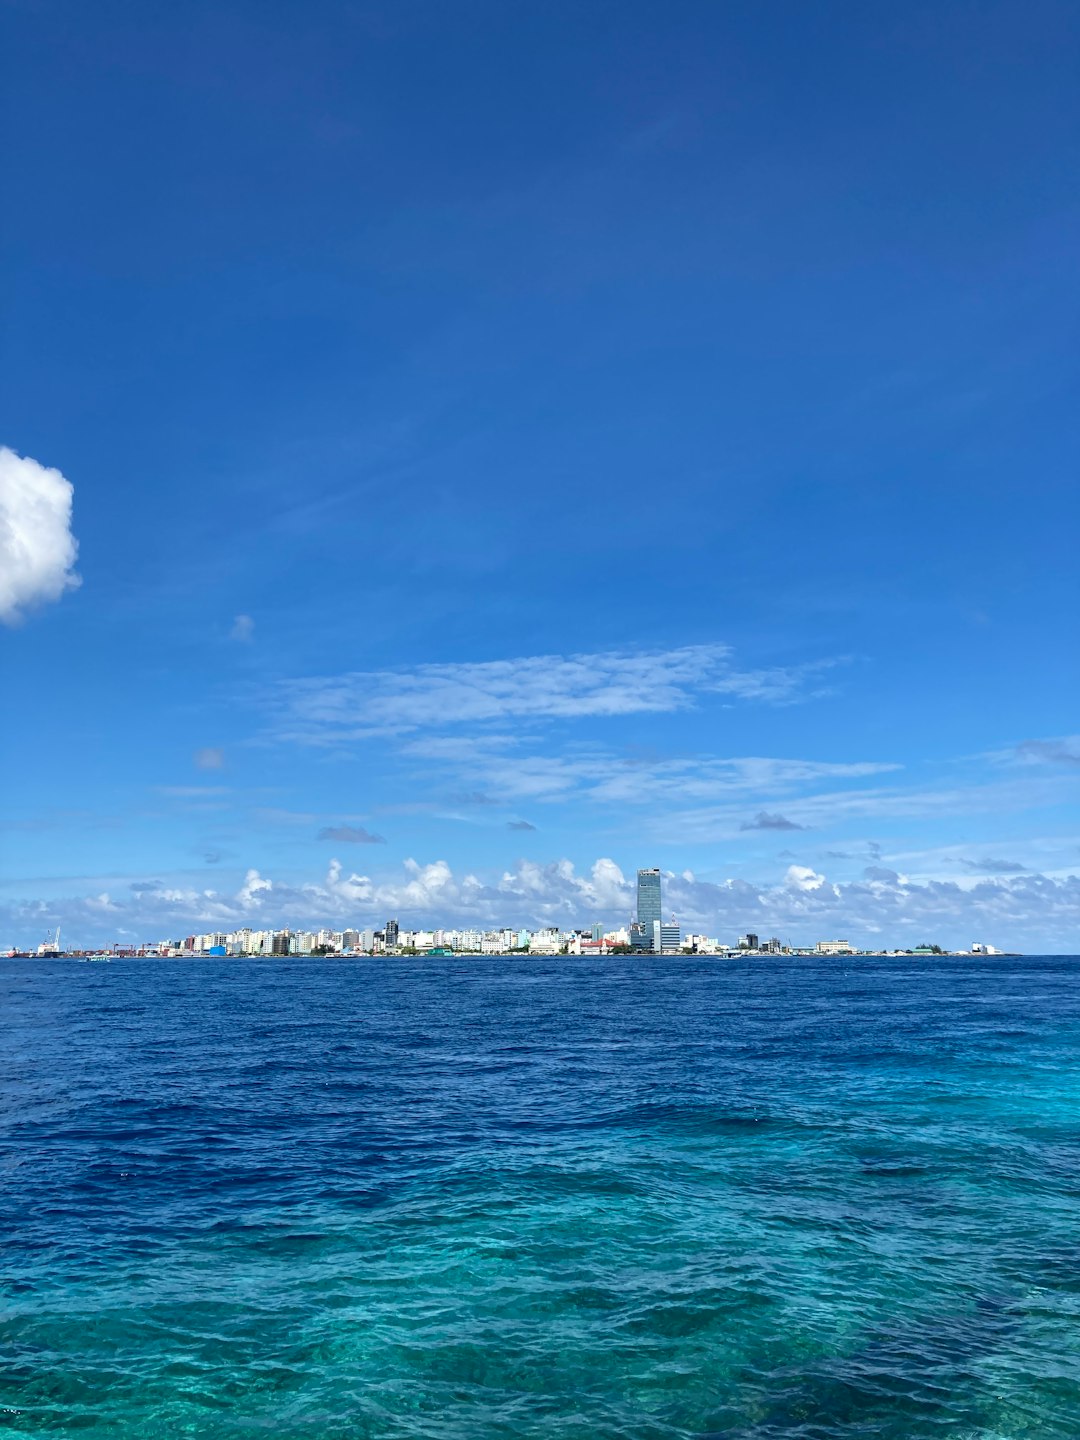 city skyline across the sea under blue and white cloudy sky during daytime